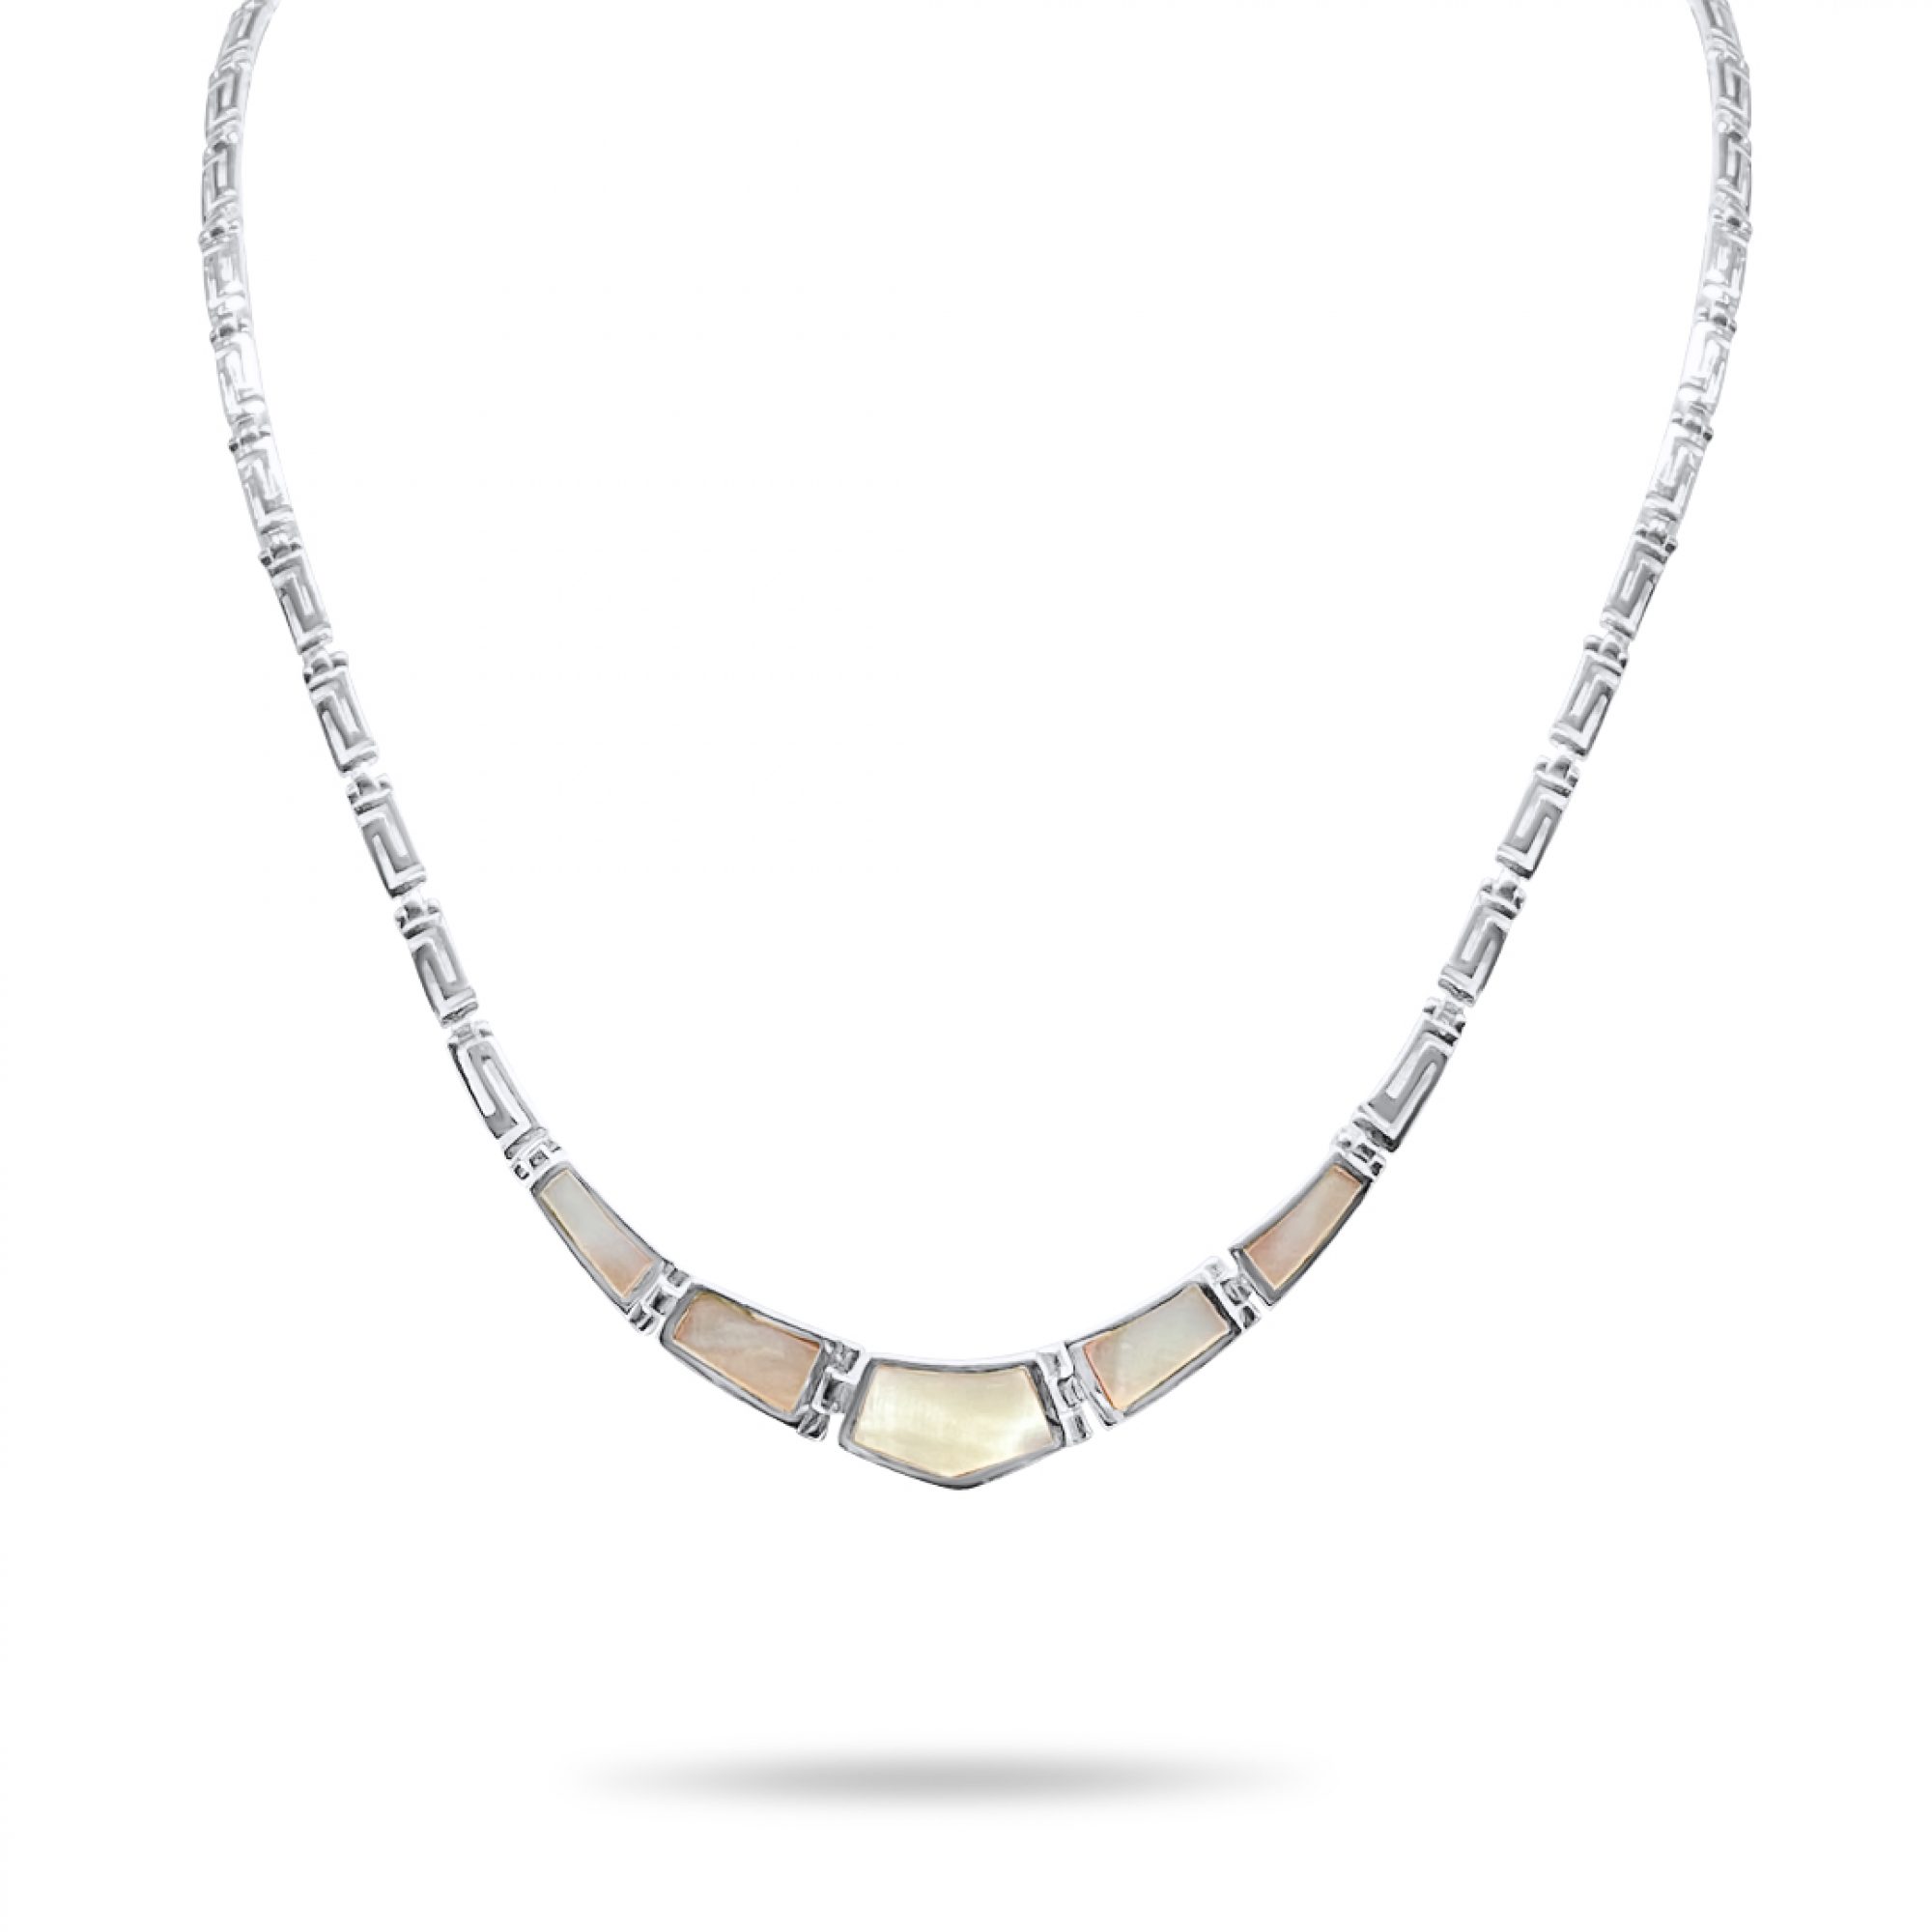 Meander necklace with mother of pearl stones